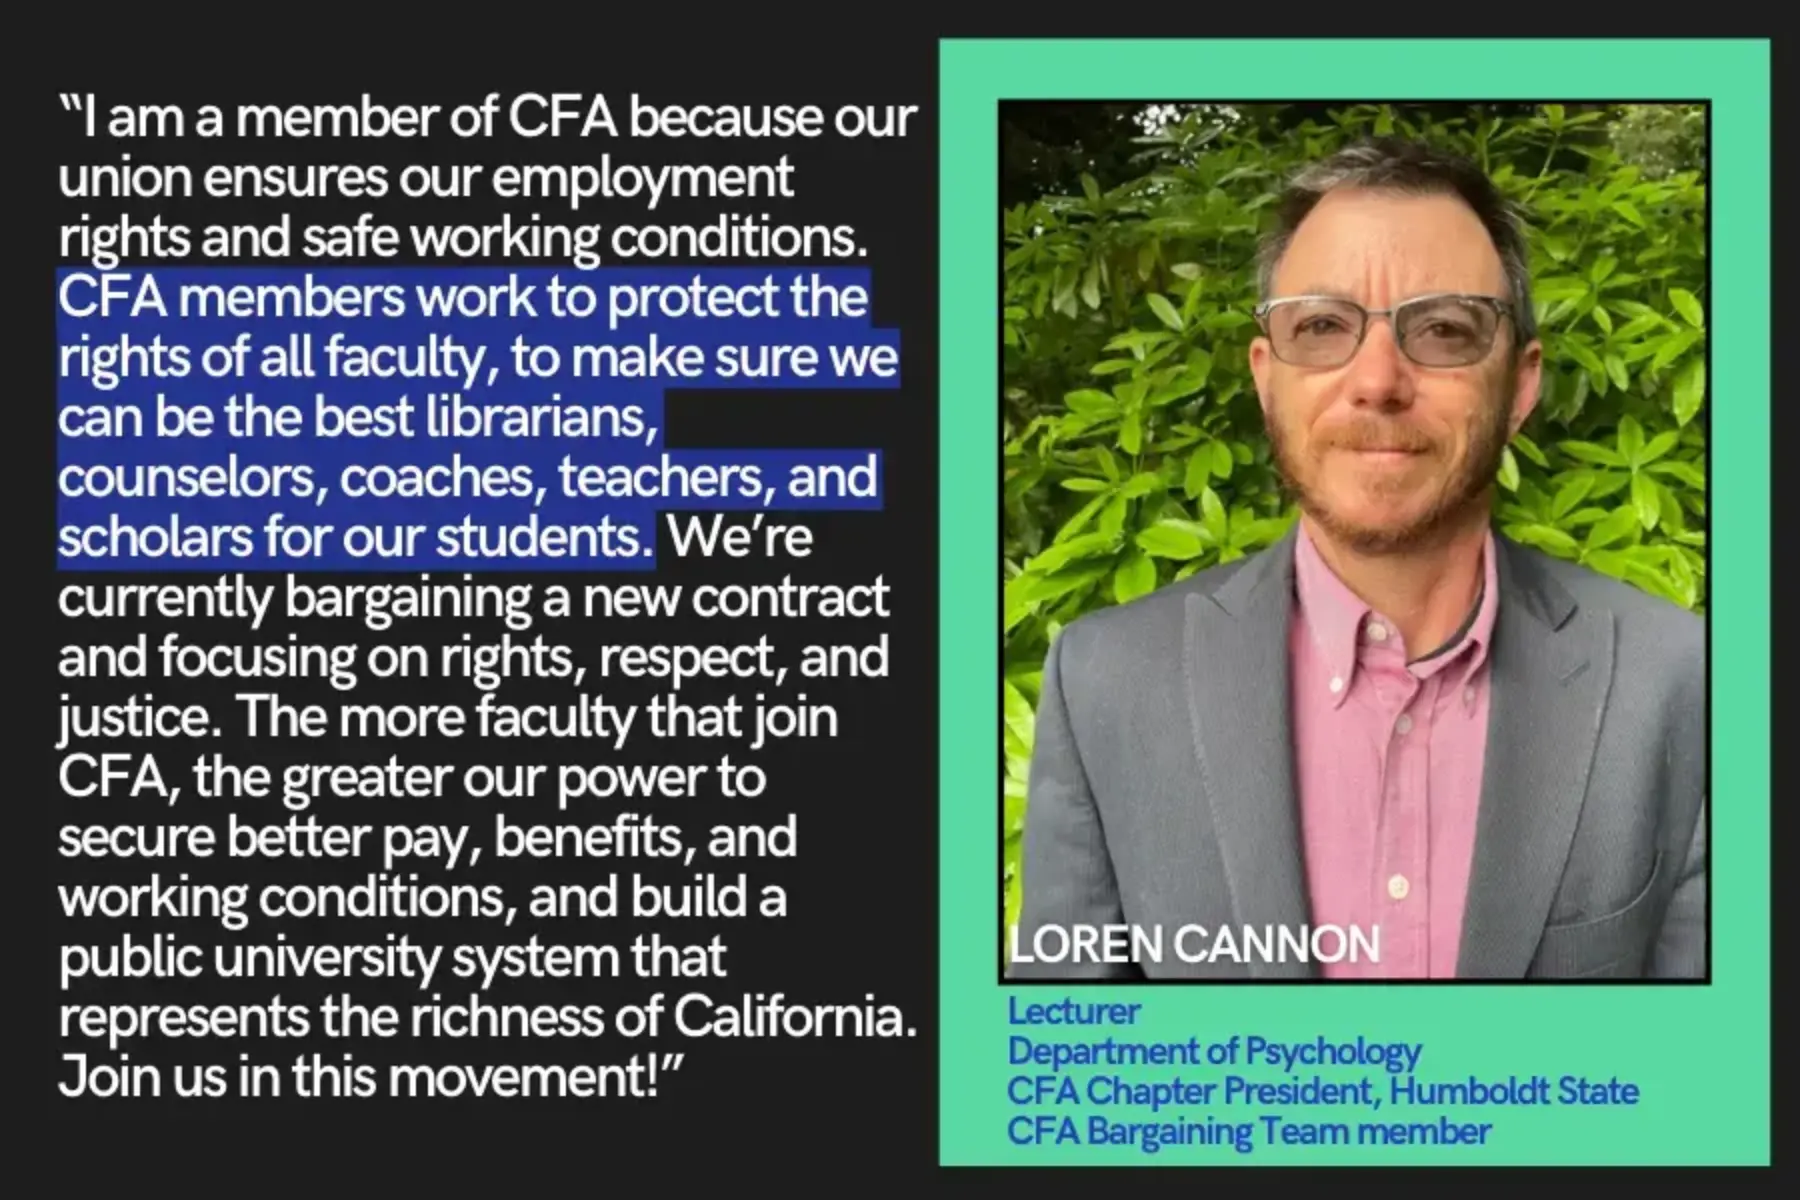 Loren Cannon talks about why he joined CFA.